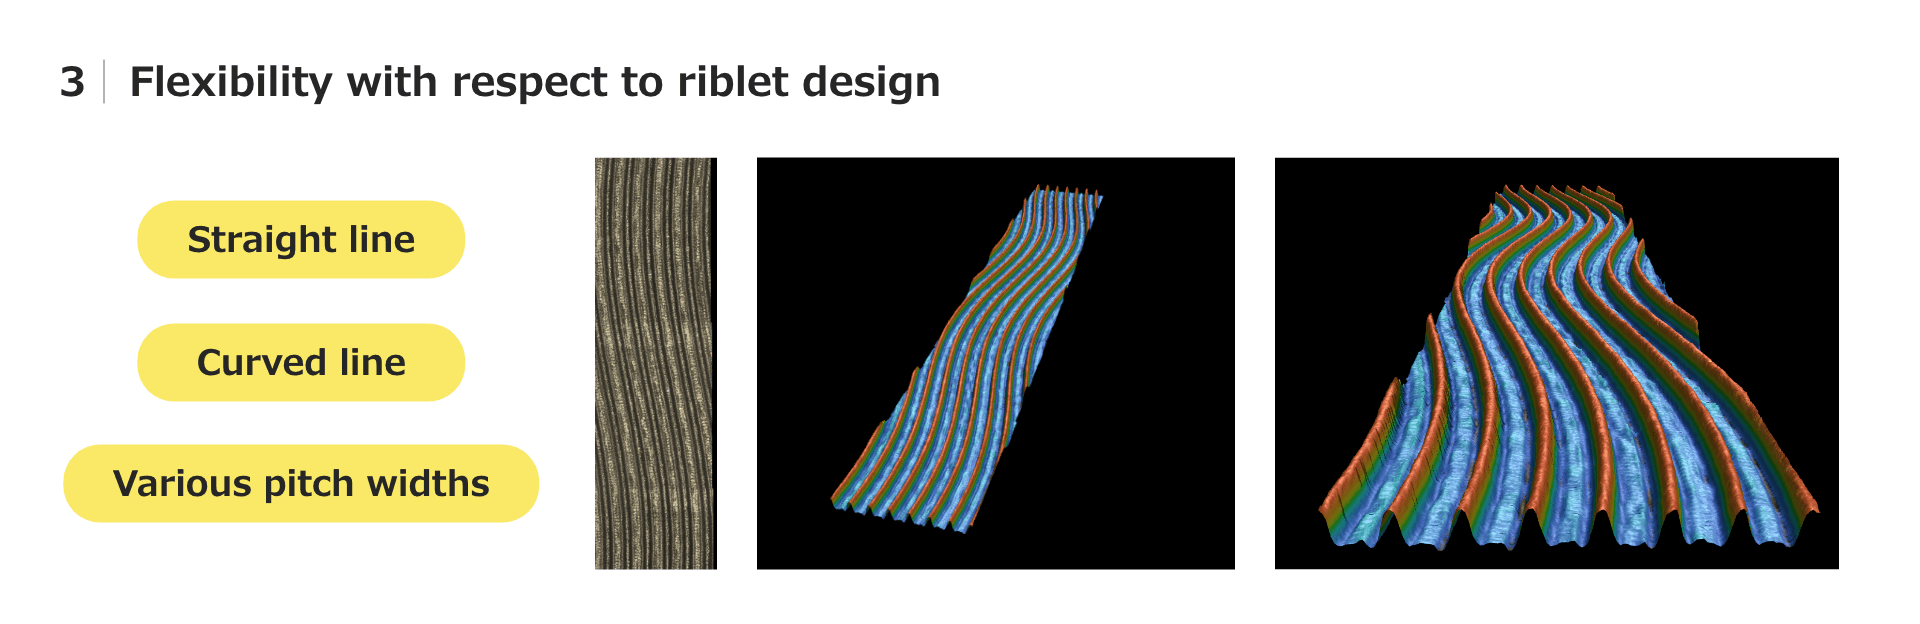 High flexibility with respect to riblet design